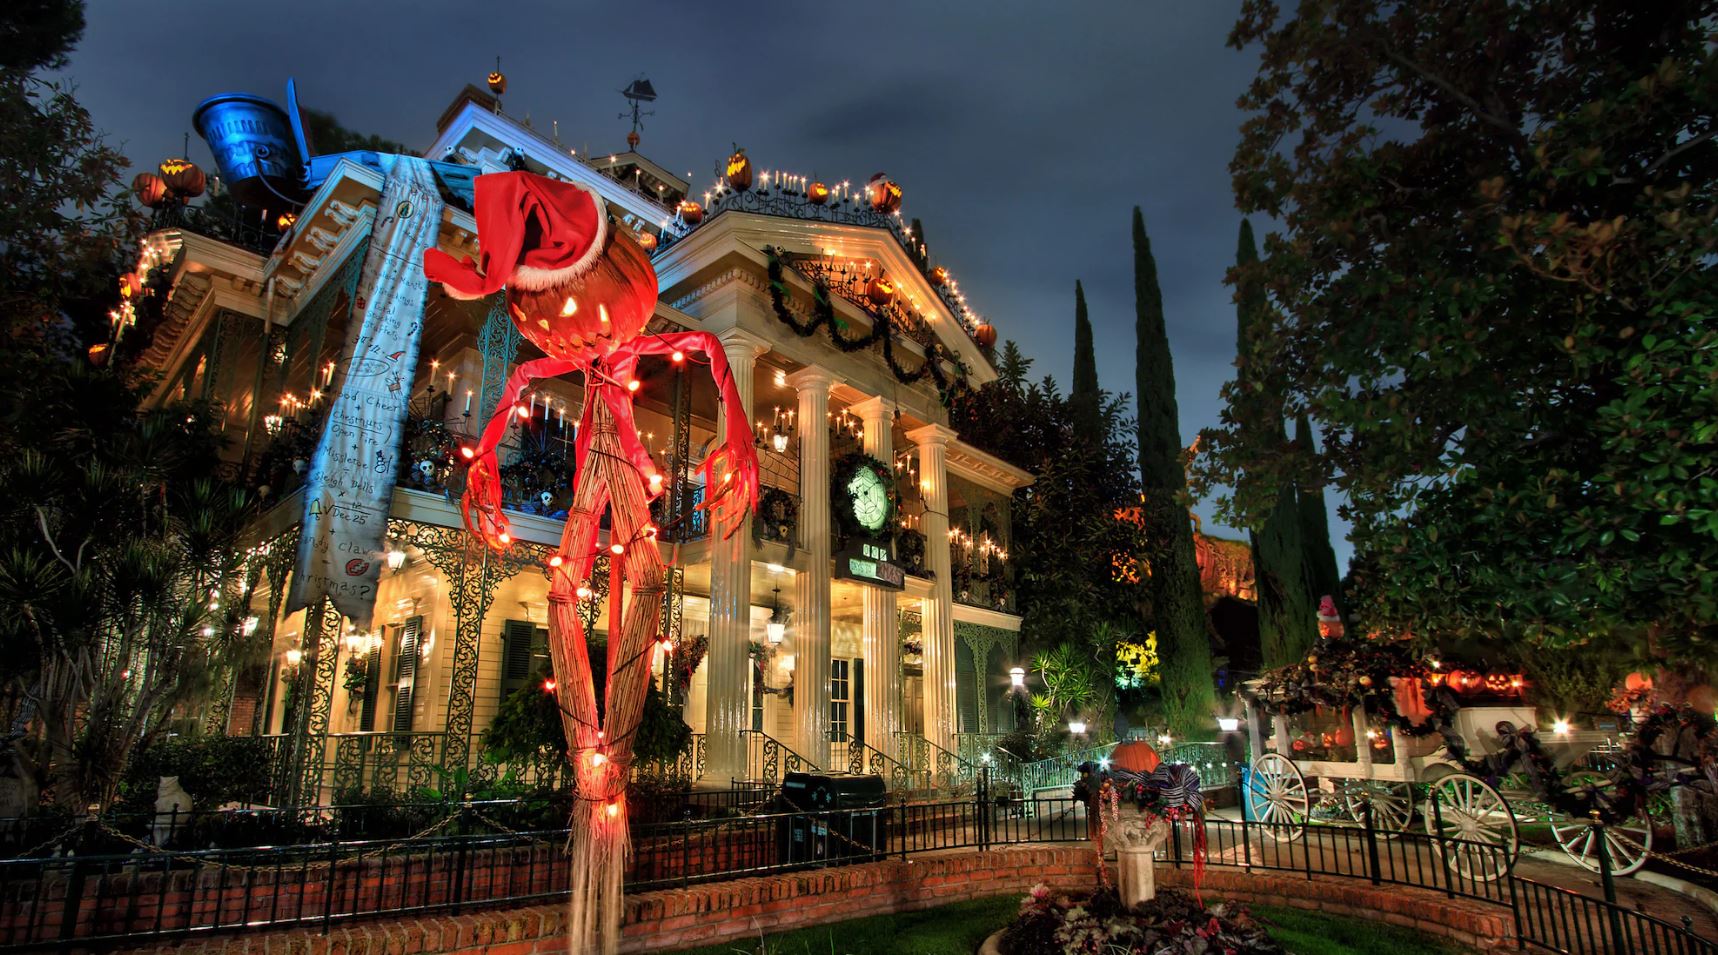 Haunted Mansion decorated for Halloween